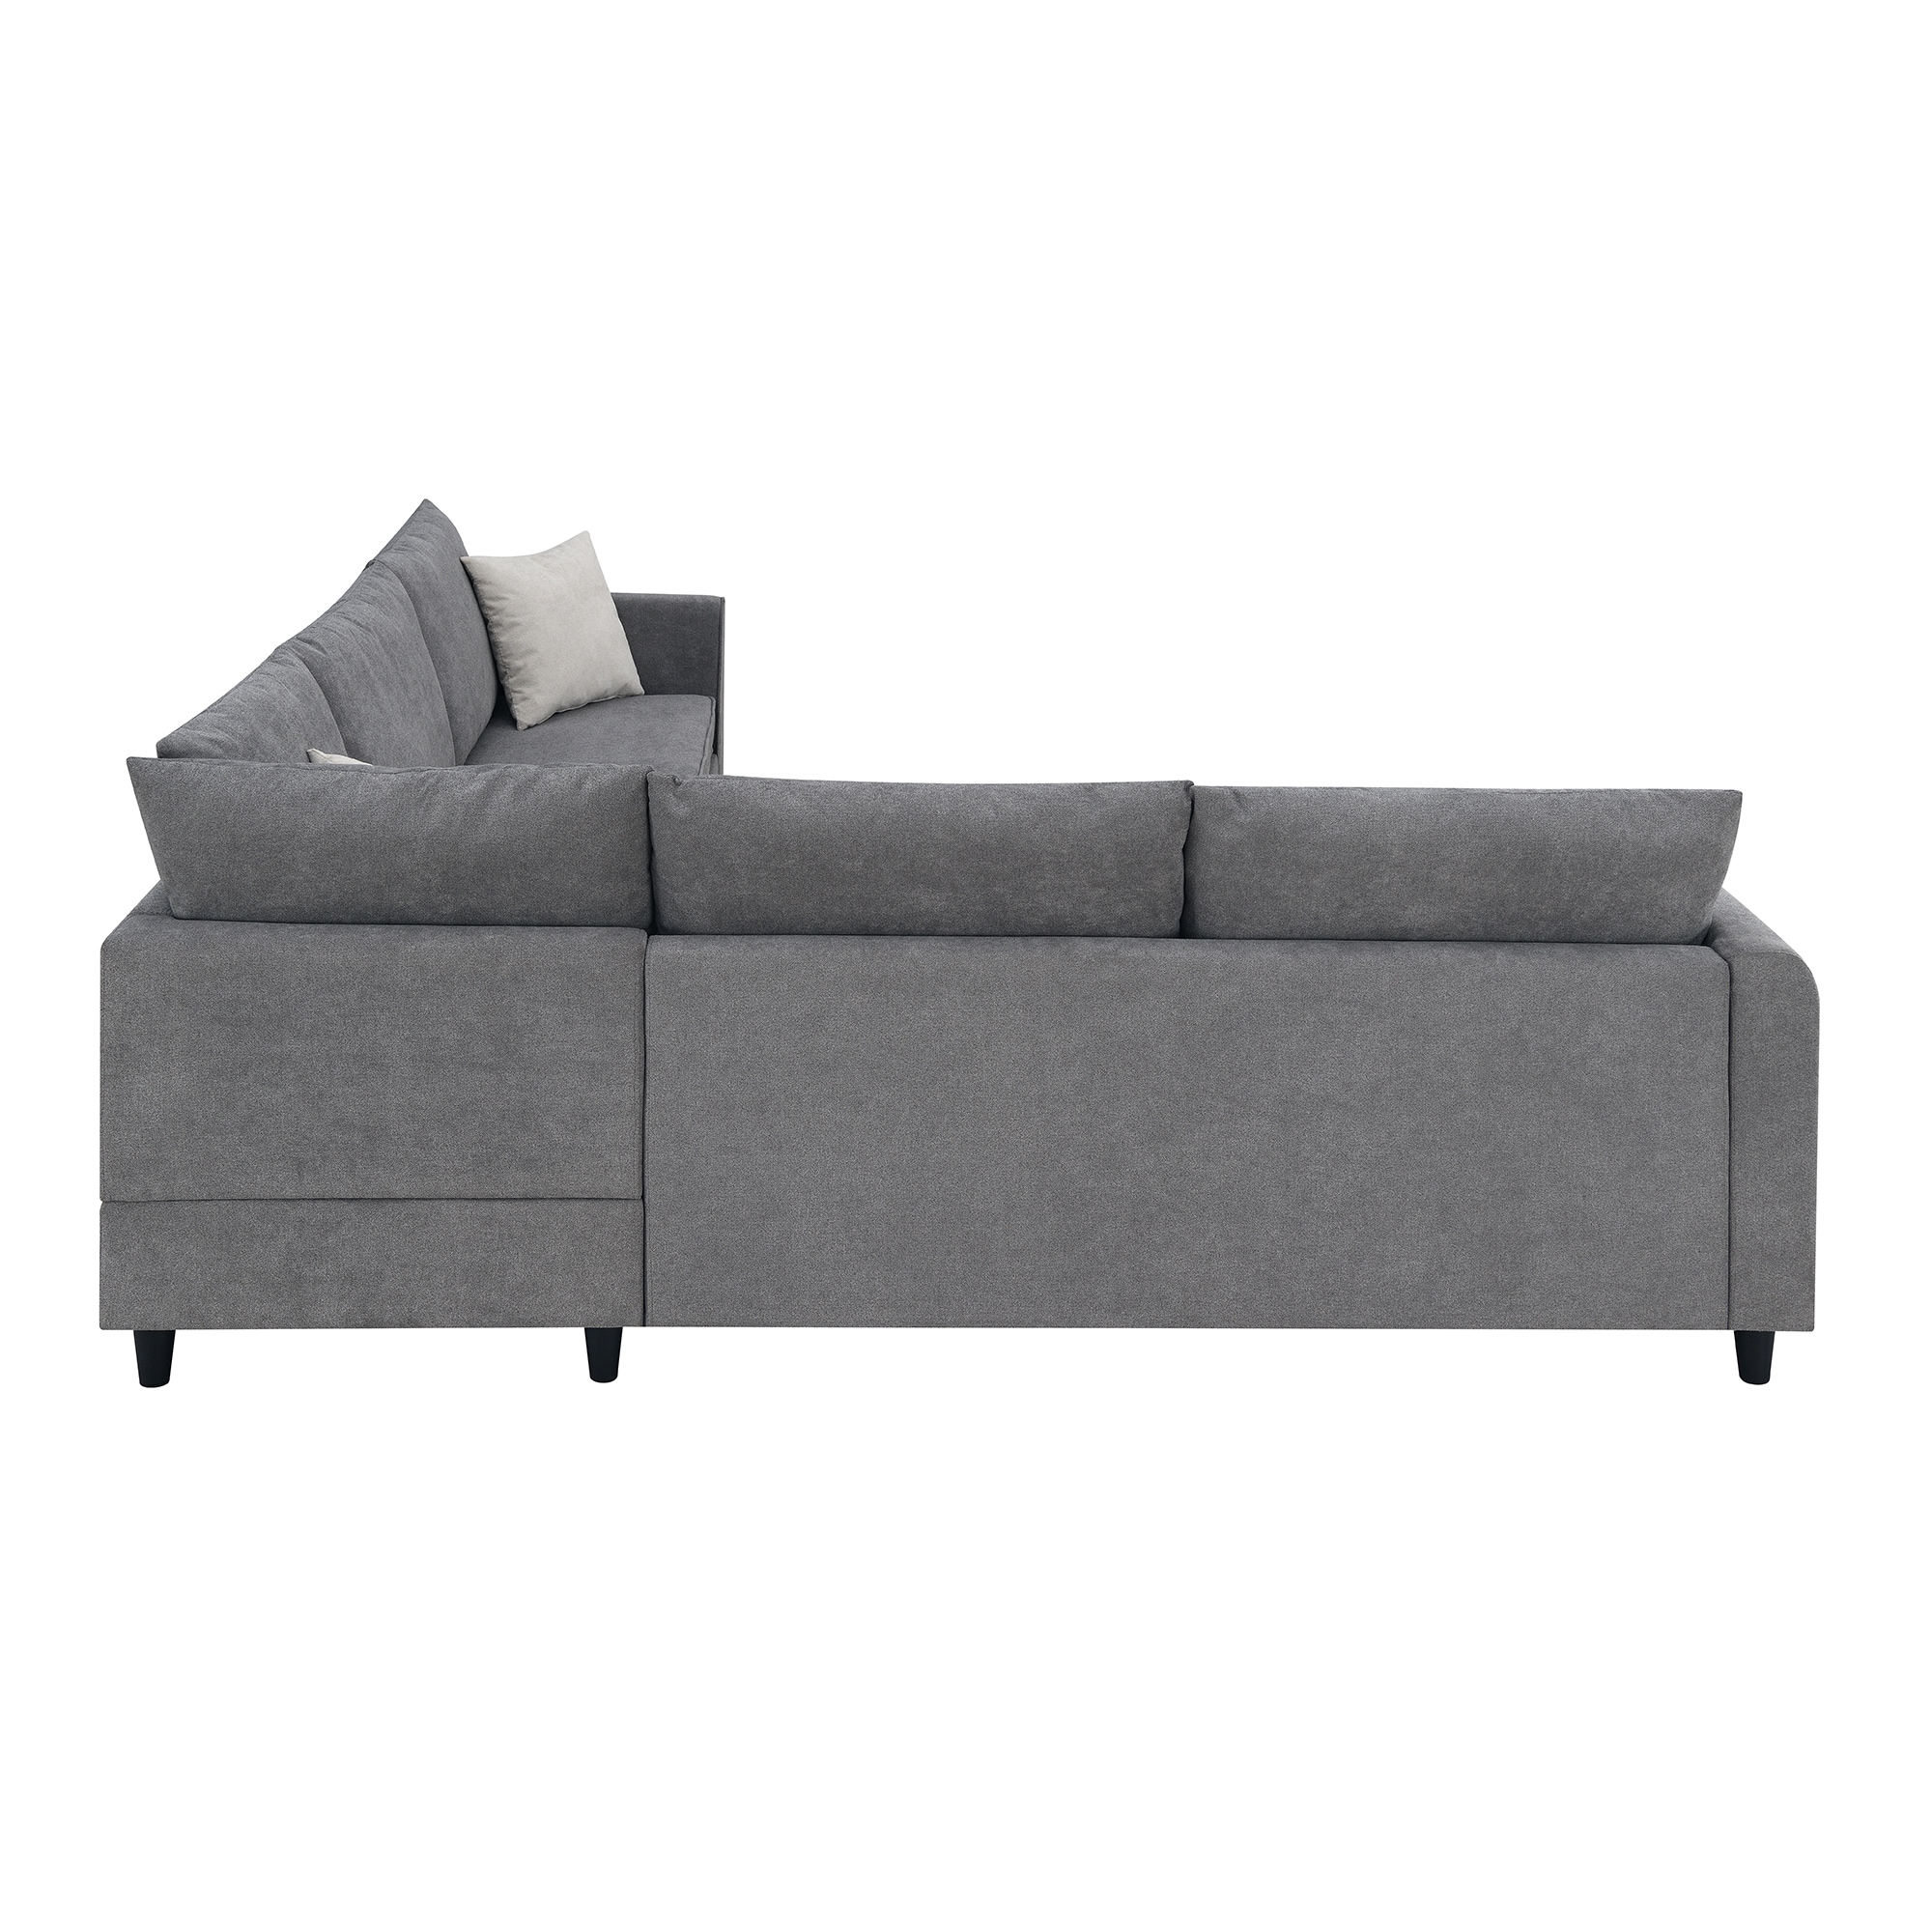 GODEER 100 in. W 3-piece Fabric Big Sectional Sofa Couch L Shape